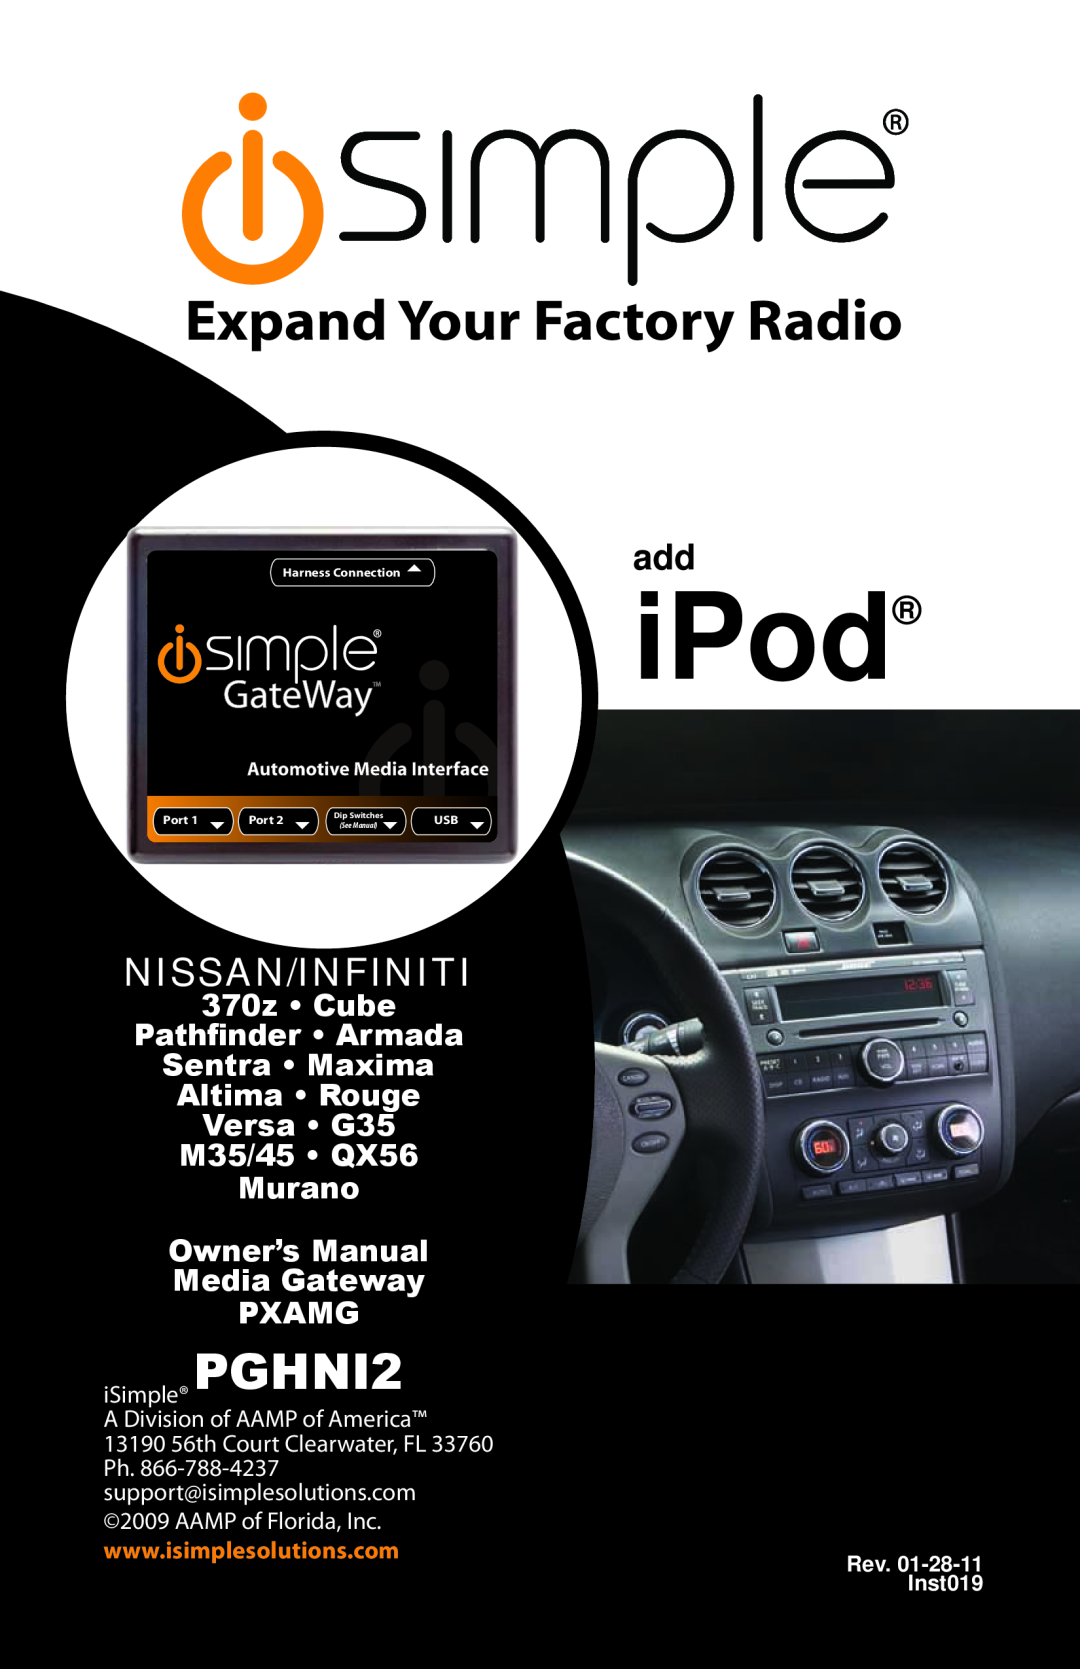 iSimple PGHNI2 owner manual iPod, Expand Your Factory Radio, Nissan/Infiniti, Owner’s Manual Media Gateway PXAMG, USB a 